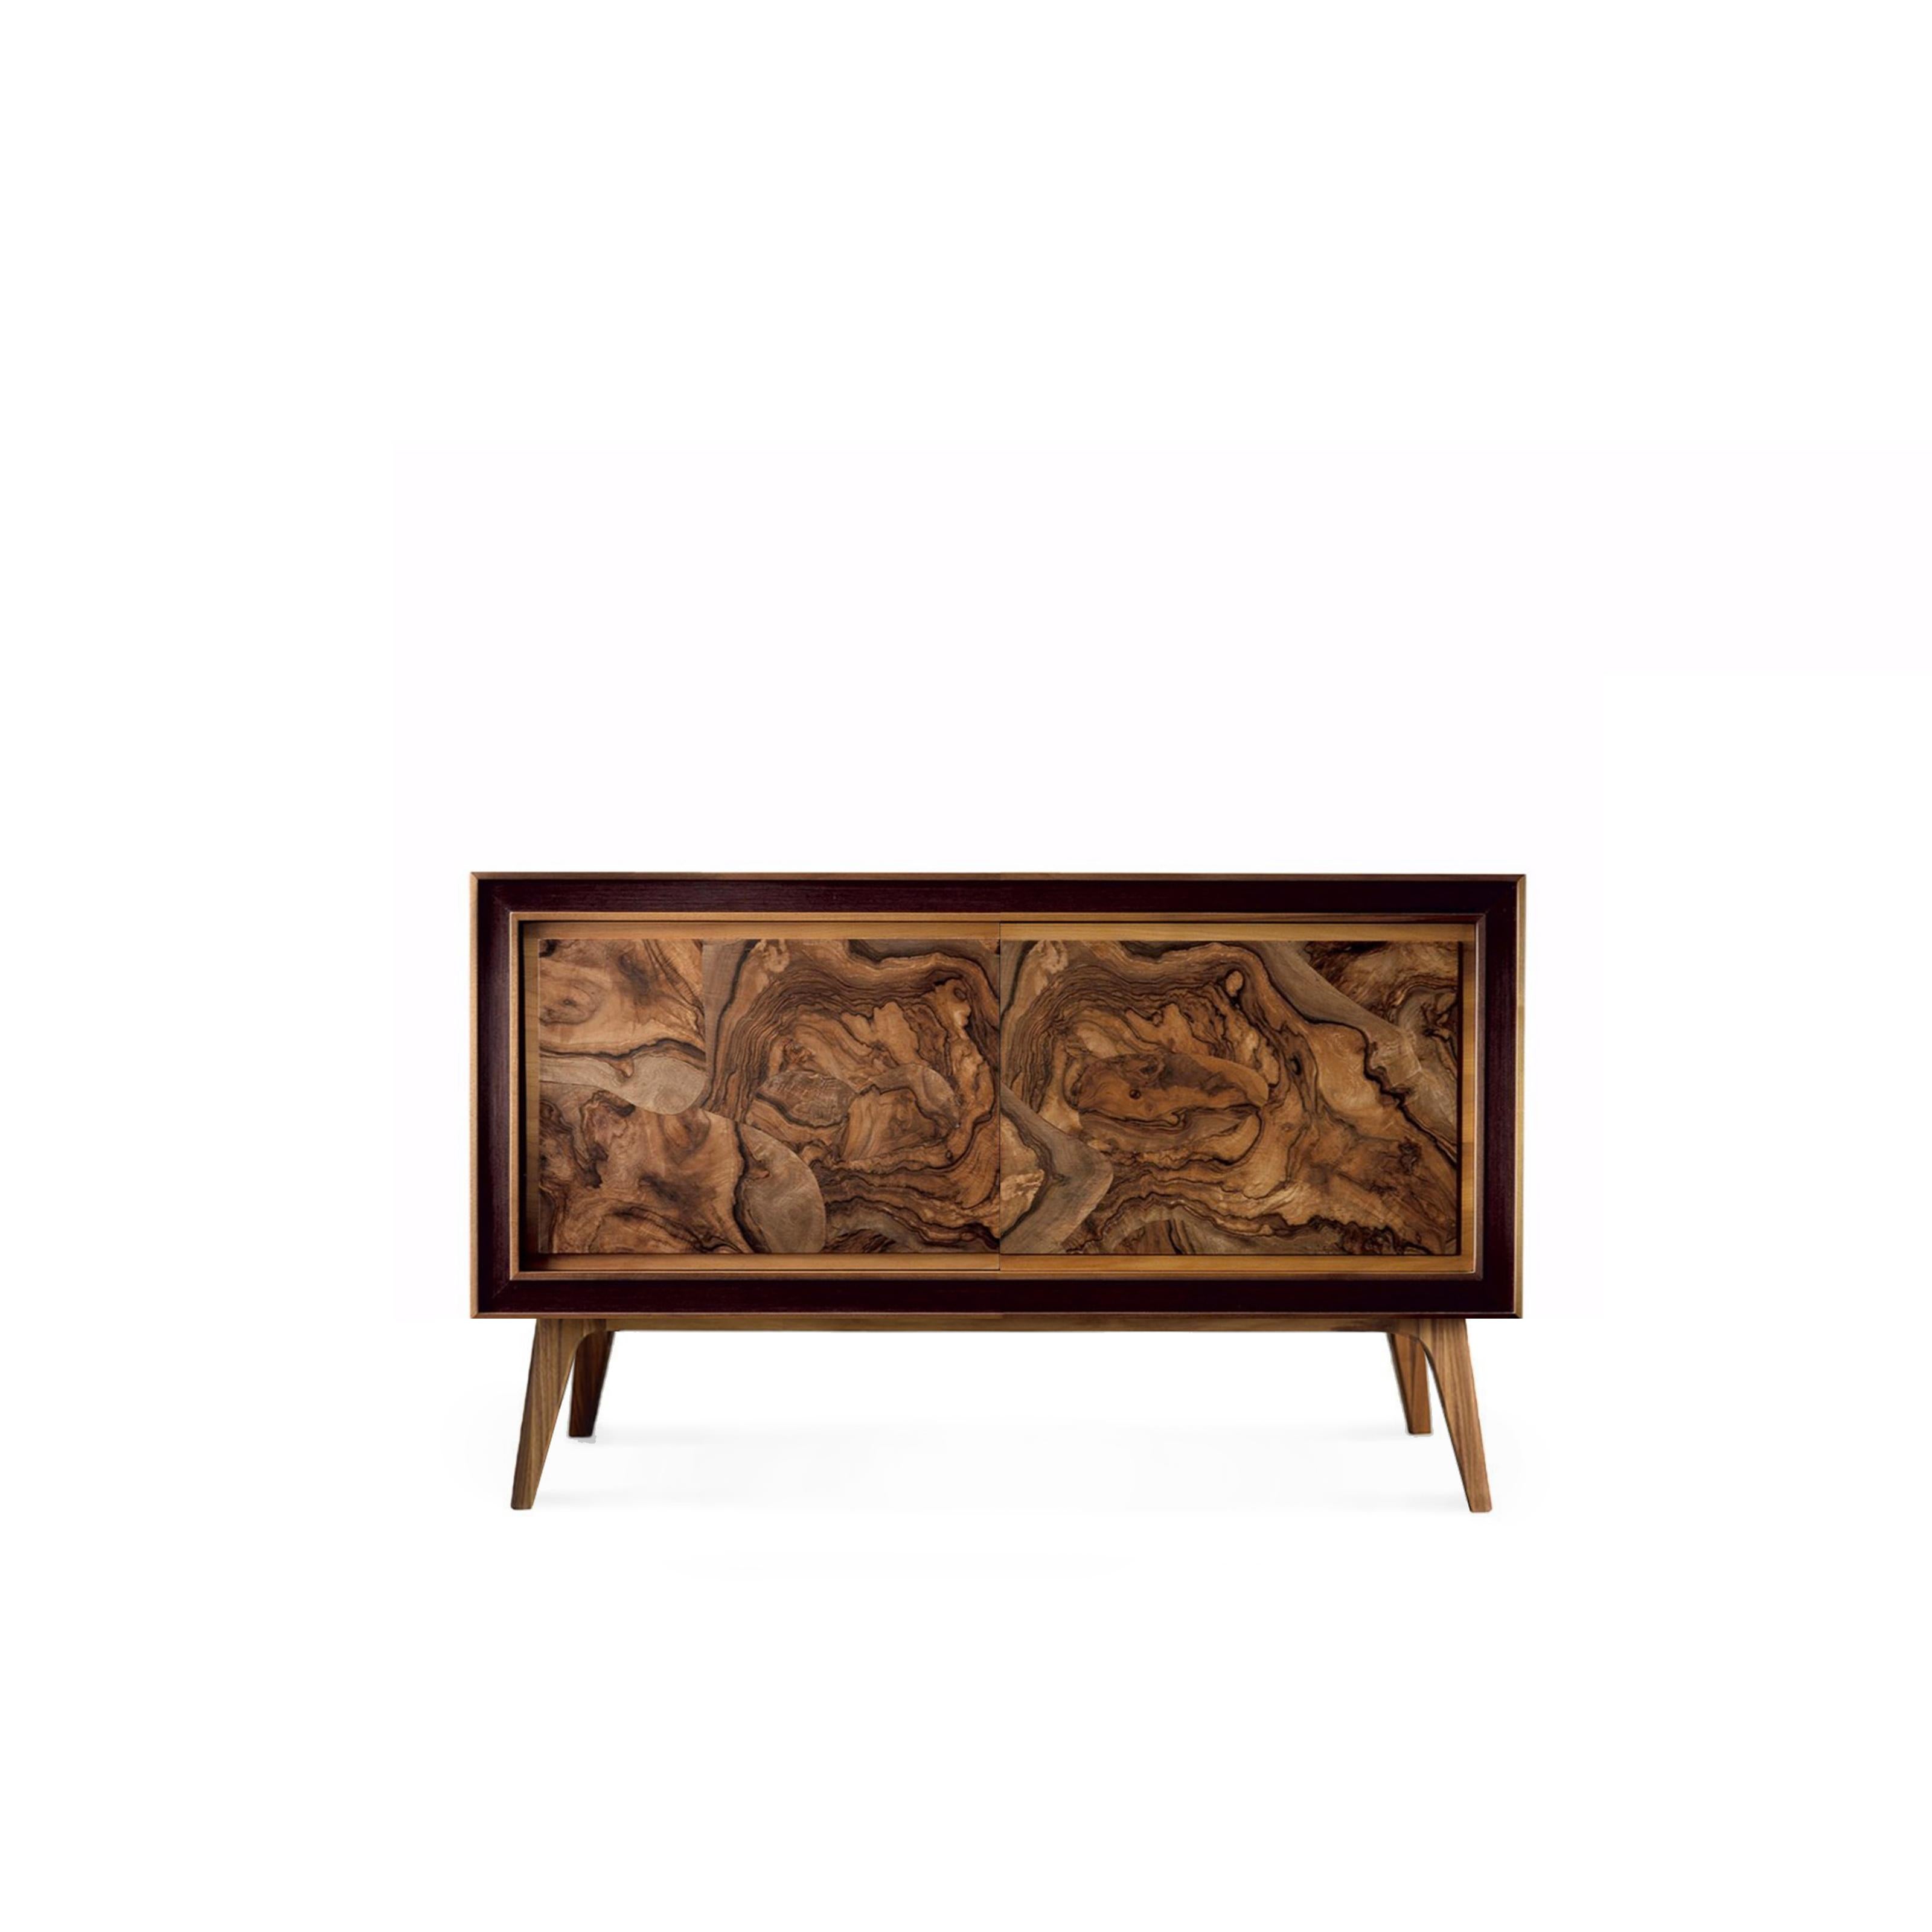 Oiled Quadra Solid Wood Sideboard, Walnut and Briar in Natural Finish, Contemporary For Sale